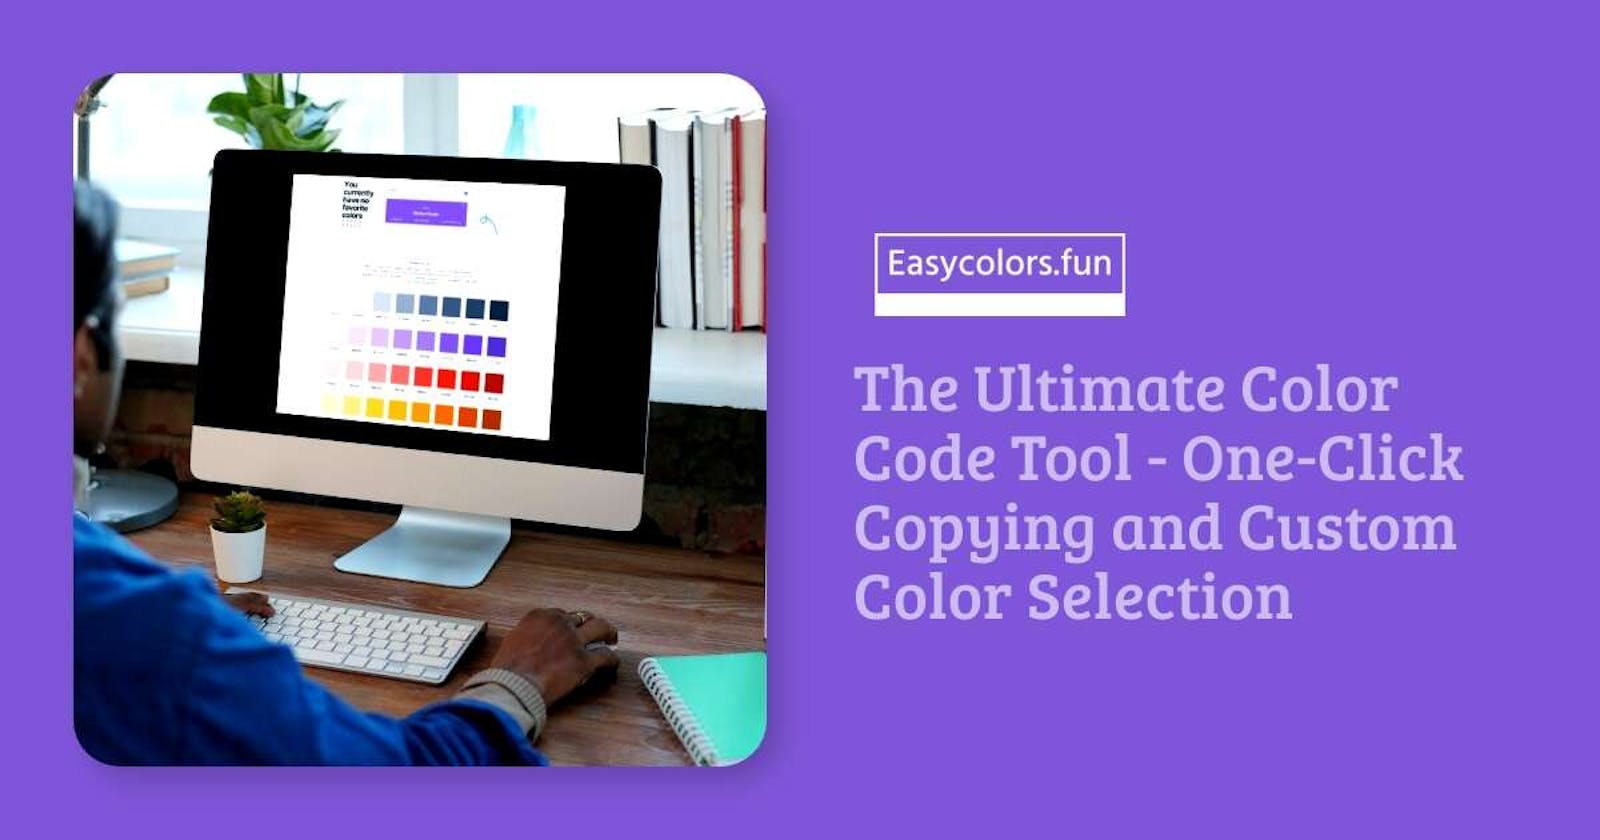 EasyColors - The Ultimate color code tool, One-click copying and custom color selection.